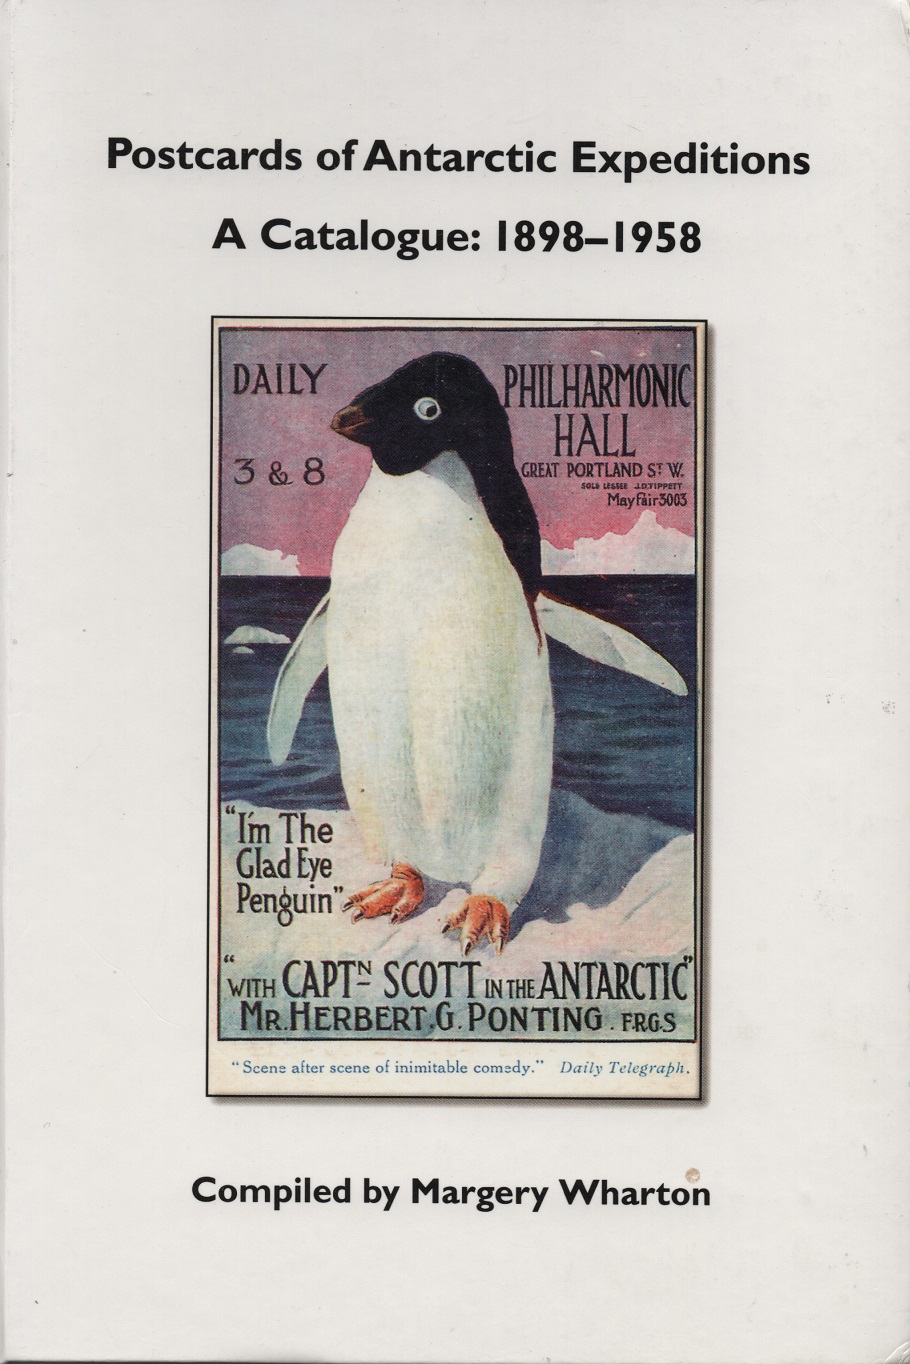 Postcards of Antarctic Expeditions 1898-1958